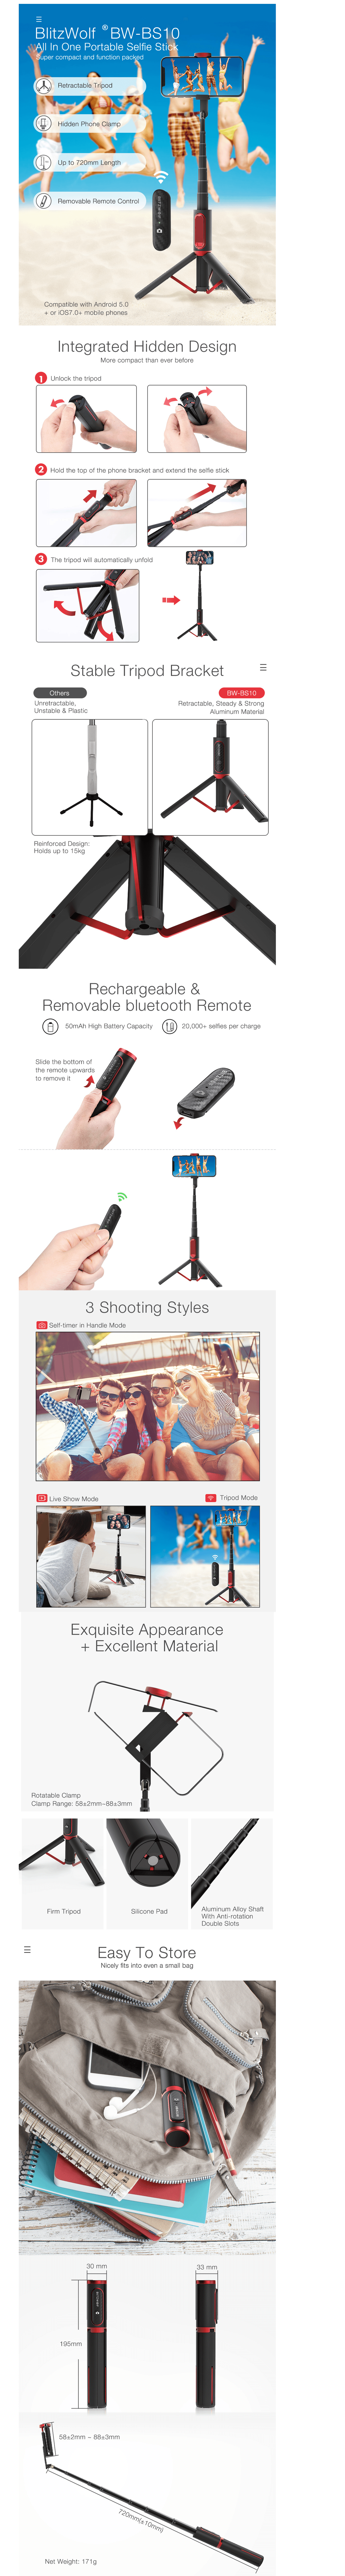 BlitzWolf® BW BS10 All In One Portable Selfie Stick with Retractable m.blitzwolf.com